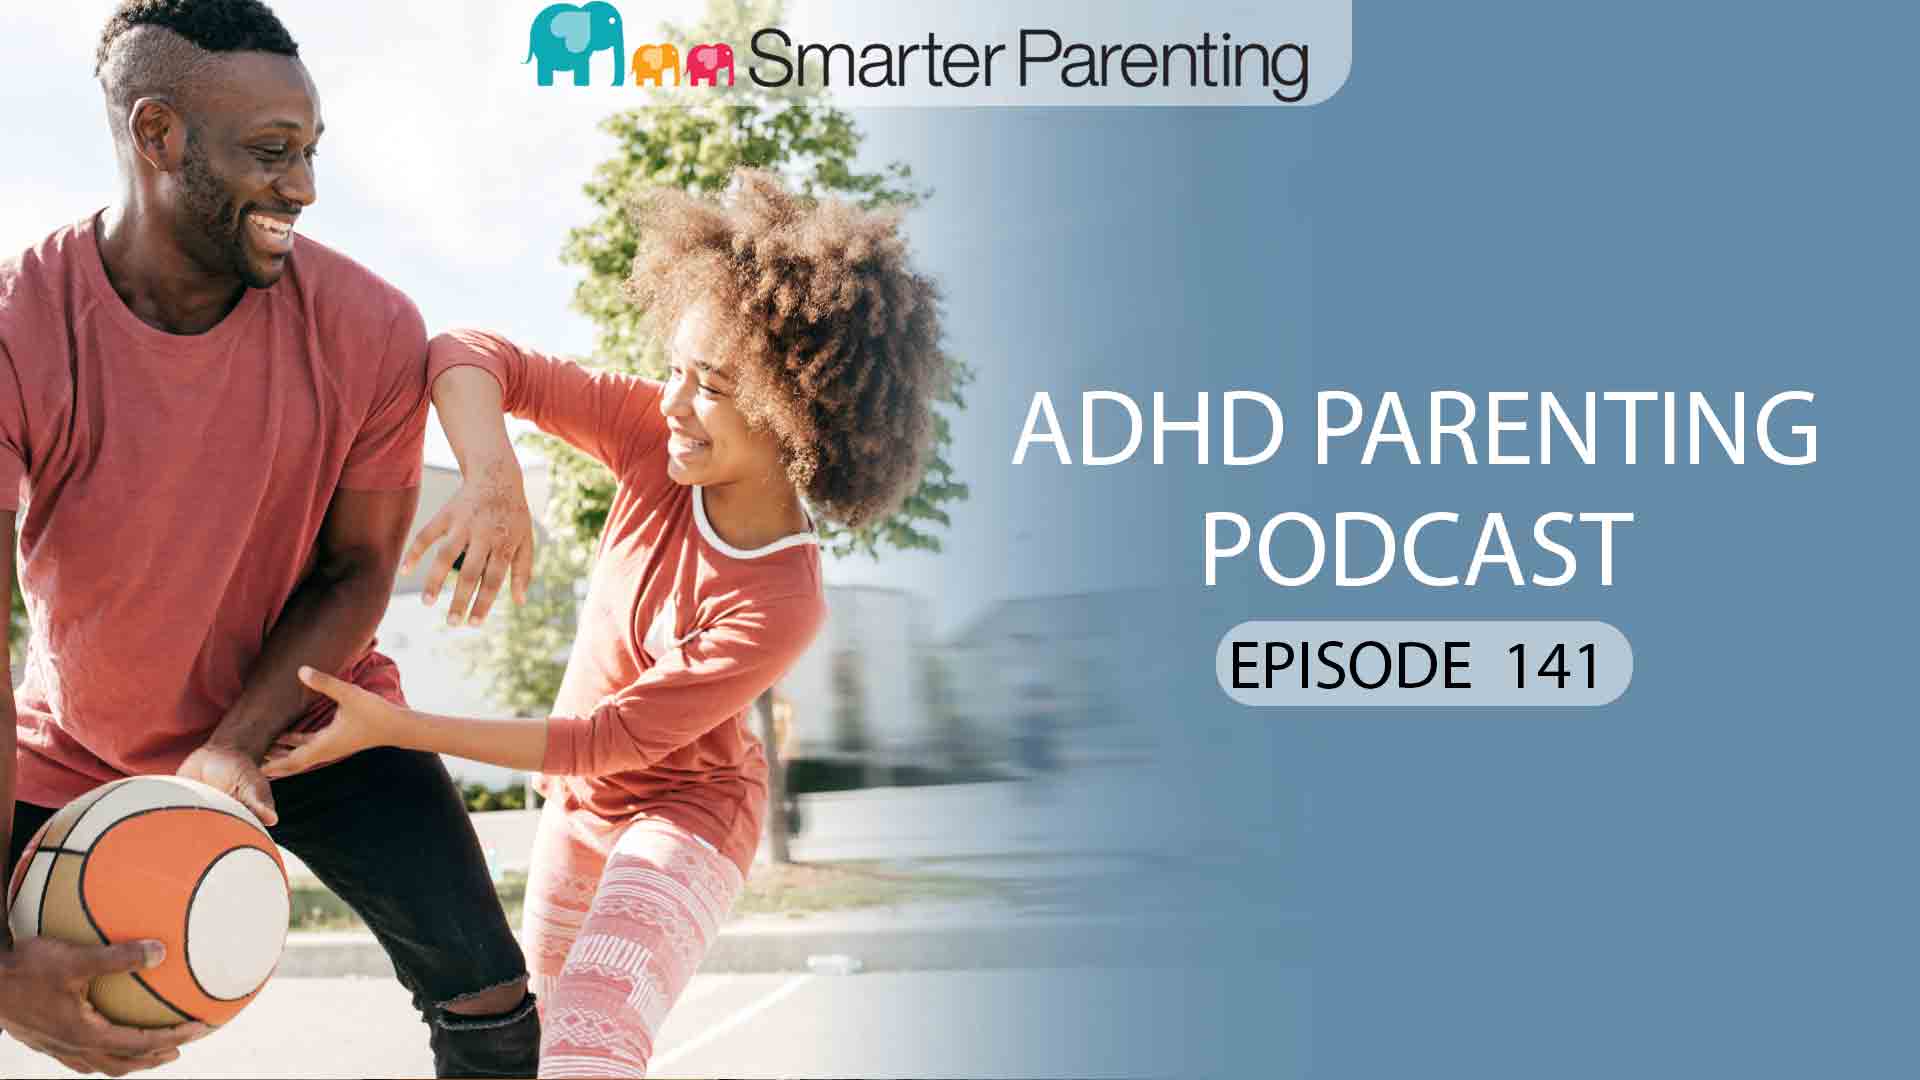 ep-141-skills-give-confidence-parenting